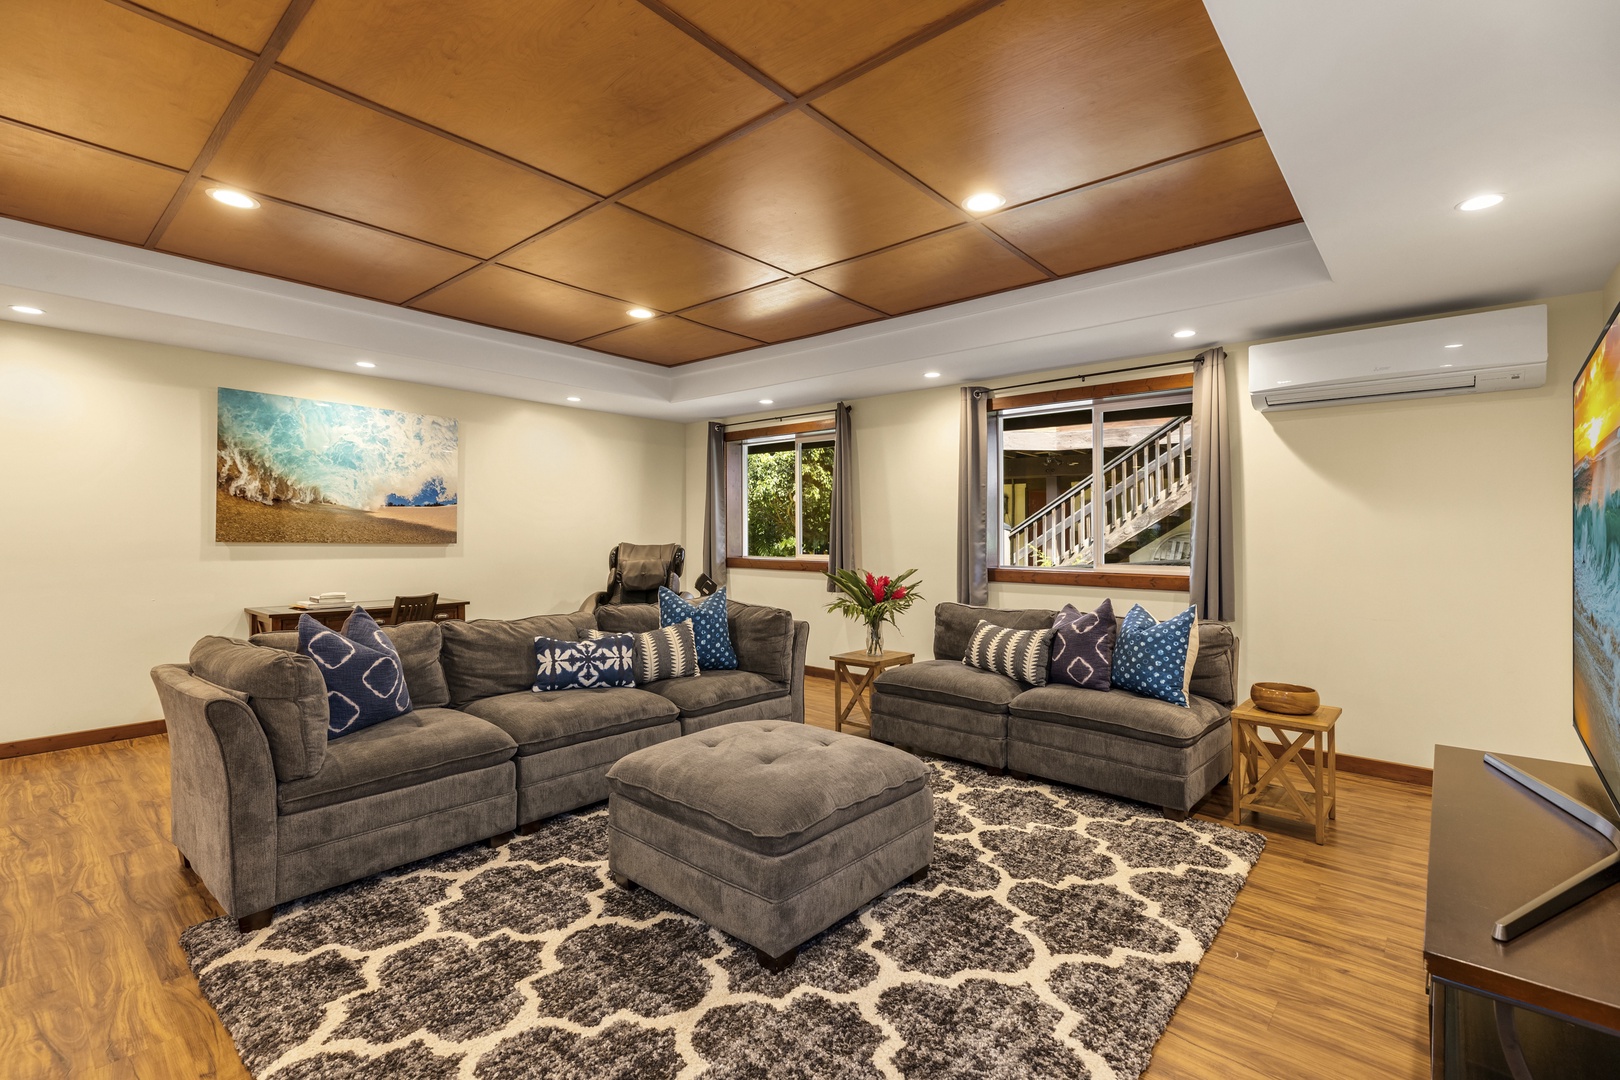 Haleiwa Vacation Rentals, Waimea Dream - A second living space downstairs offers split air conditioning, a large-screen television, a massage chair, and a desk.